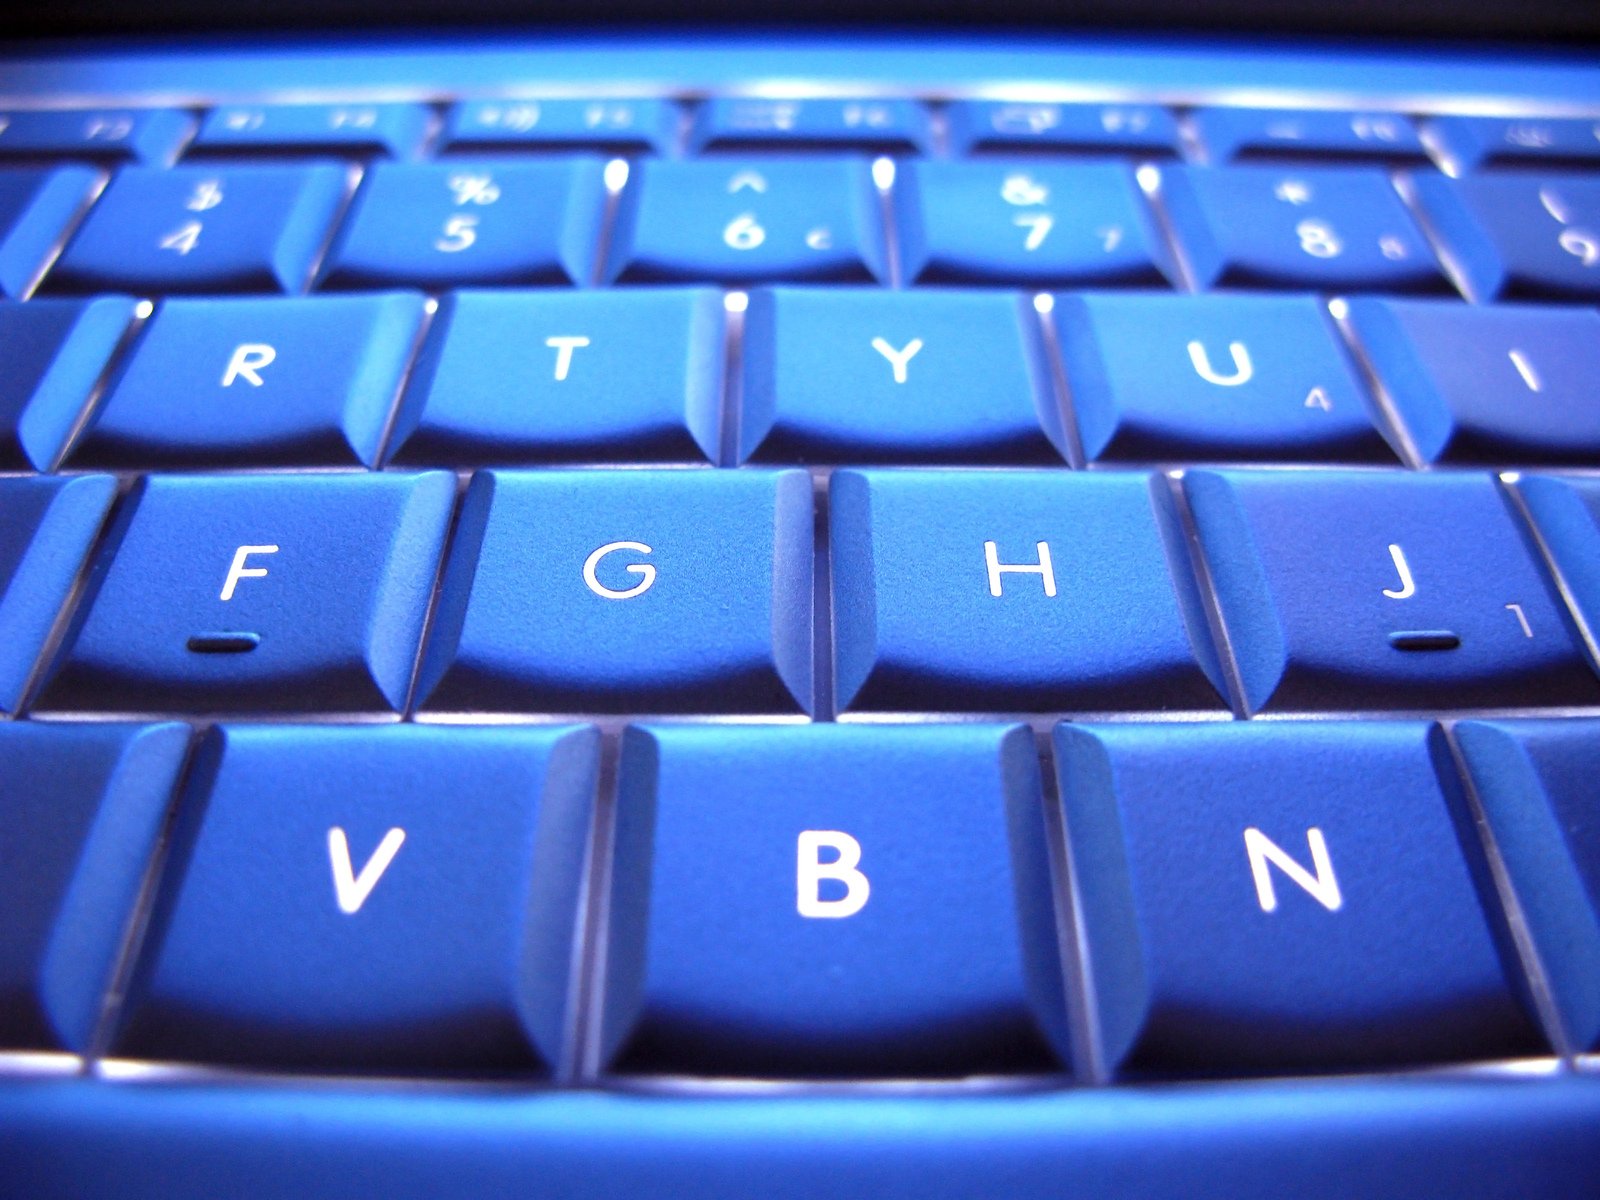 blue keyboard showing two small, small letters